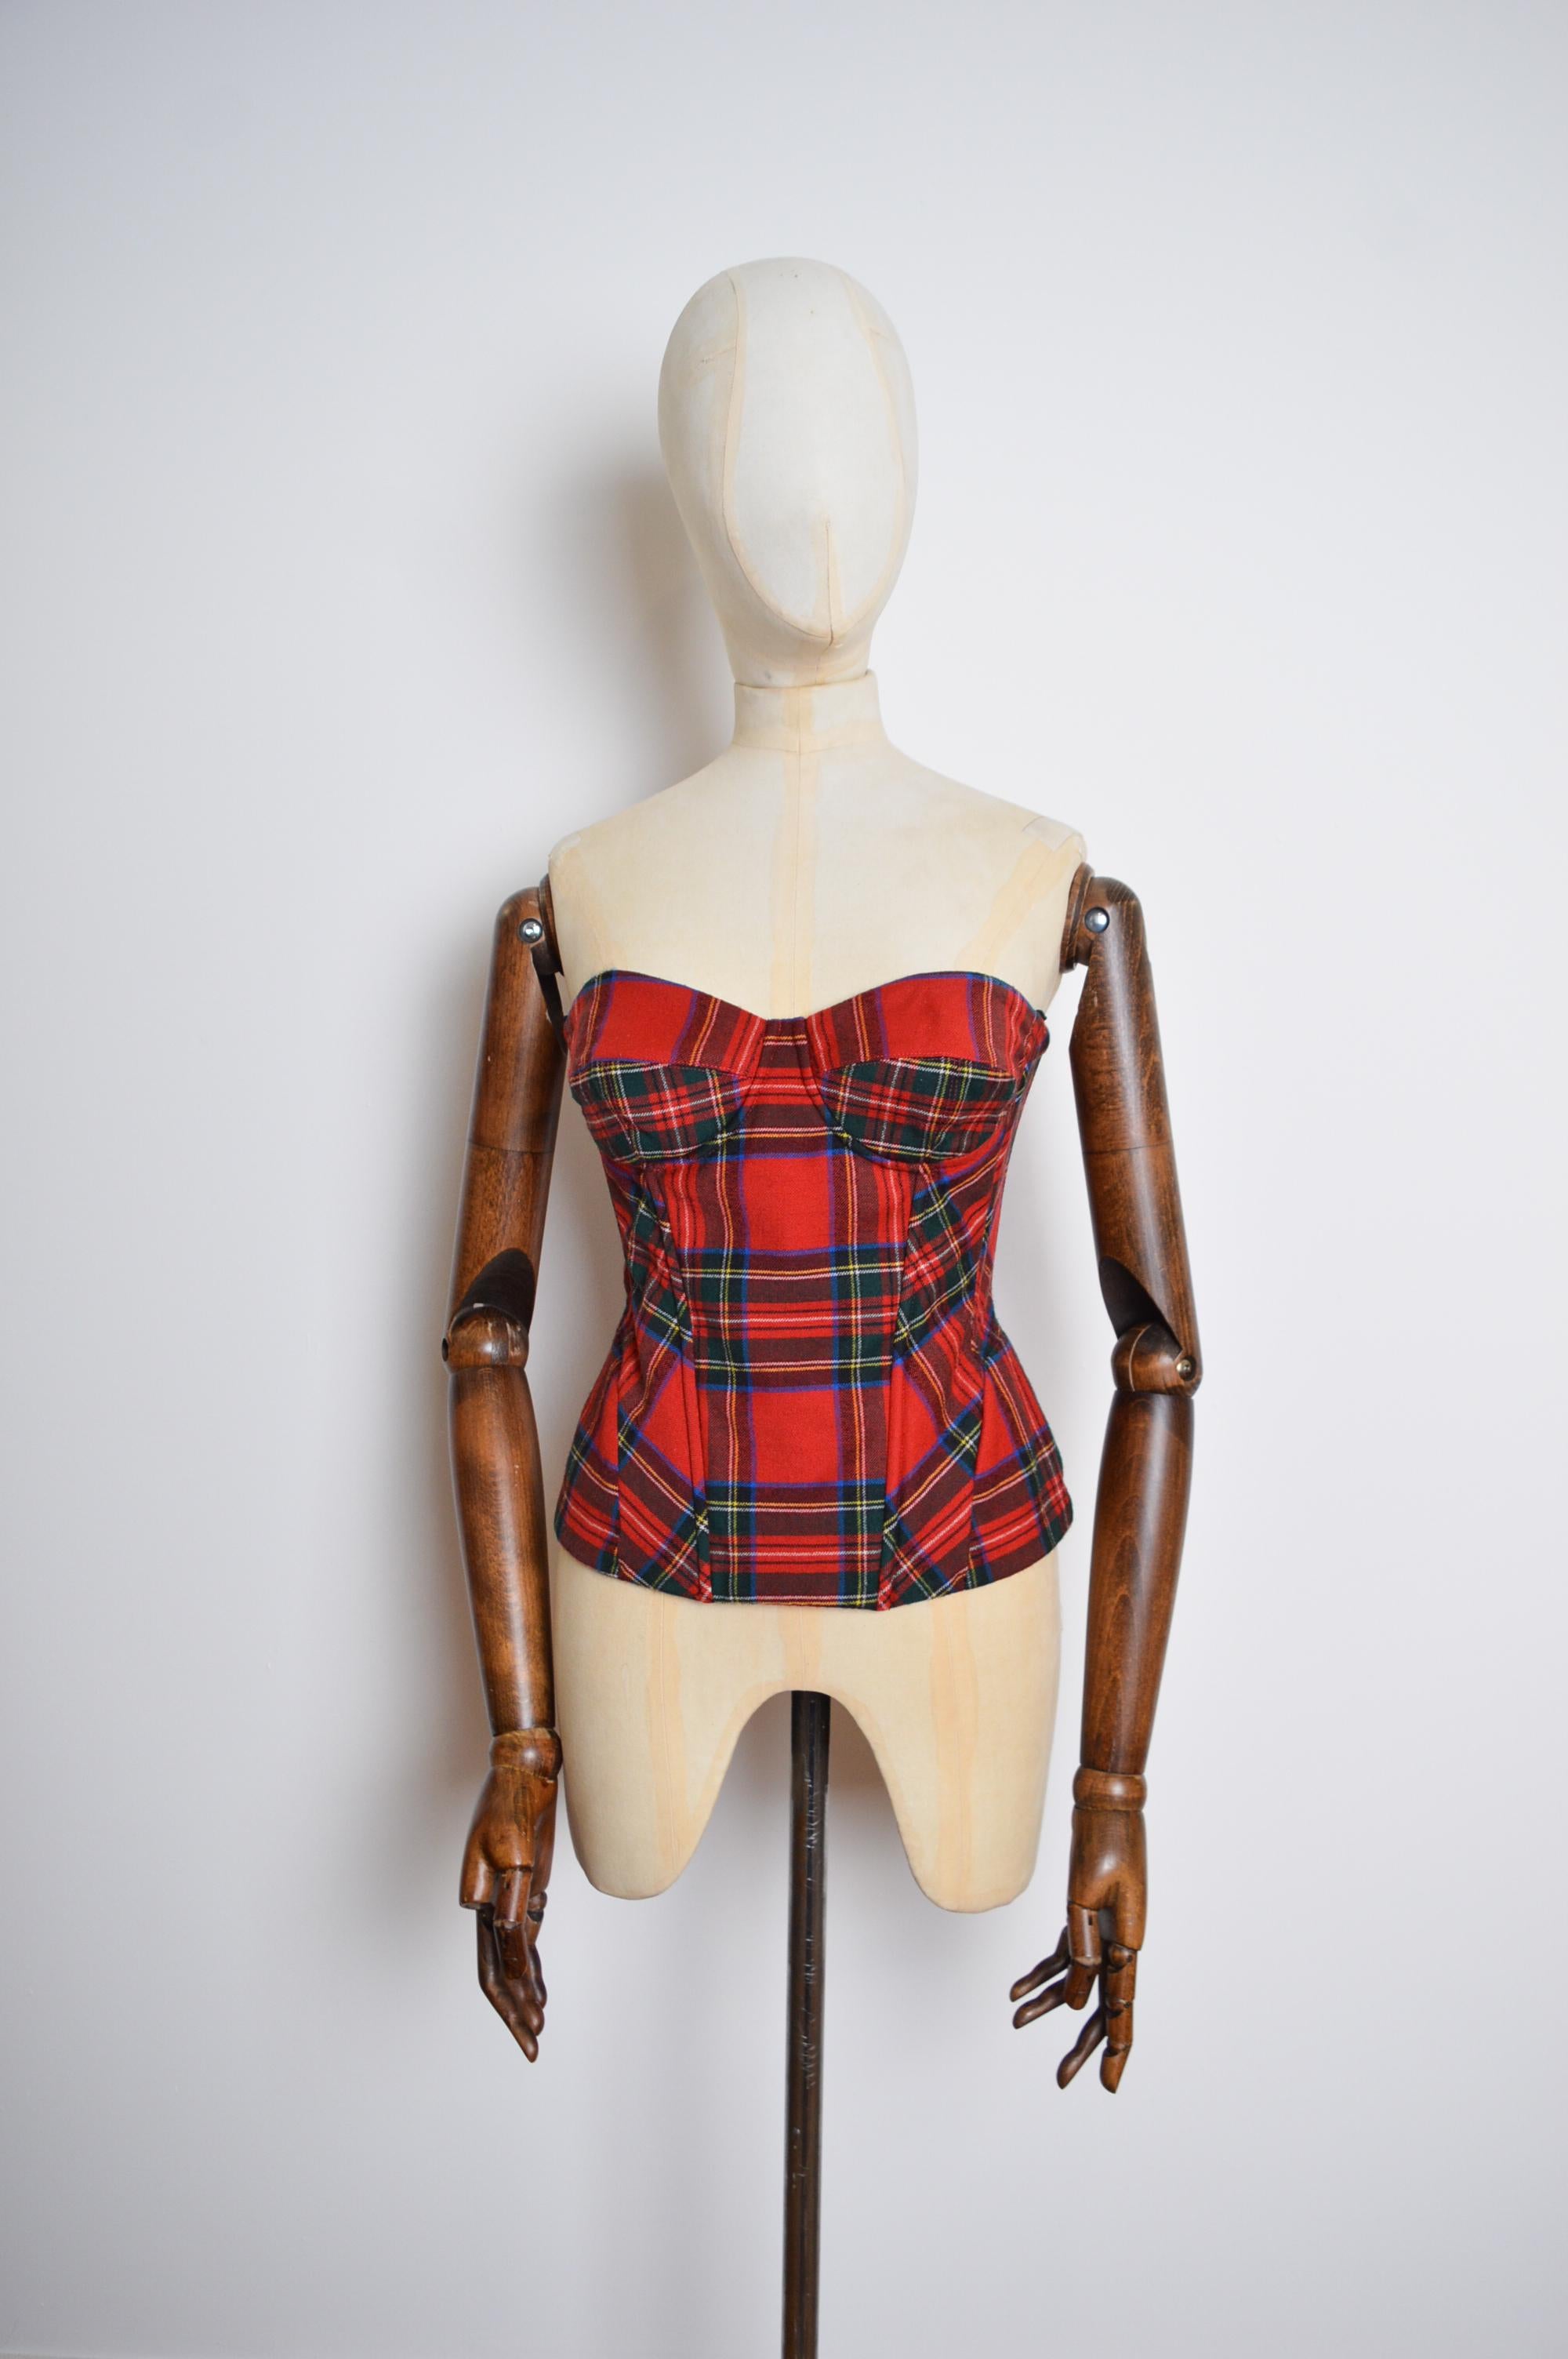 Fun early 2000's Dolce & Gabbana boned Corset crafted from a Red Tartan Wool material with a Black satin interior lining. 
 
Features;
Chrome Double Zip Back Closure
Hip shaped panelling
Boned body
Underwired
89% Virgin Wool
 
Sizing in